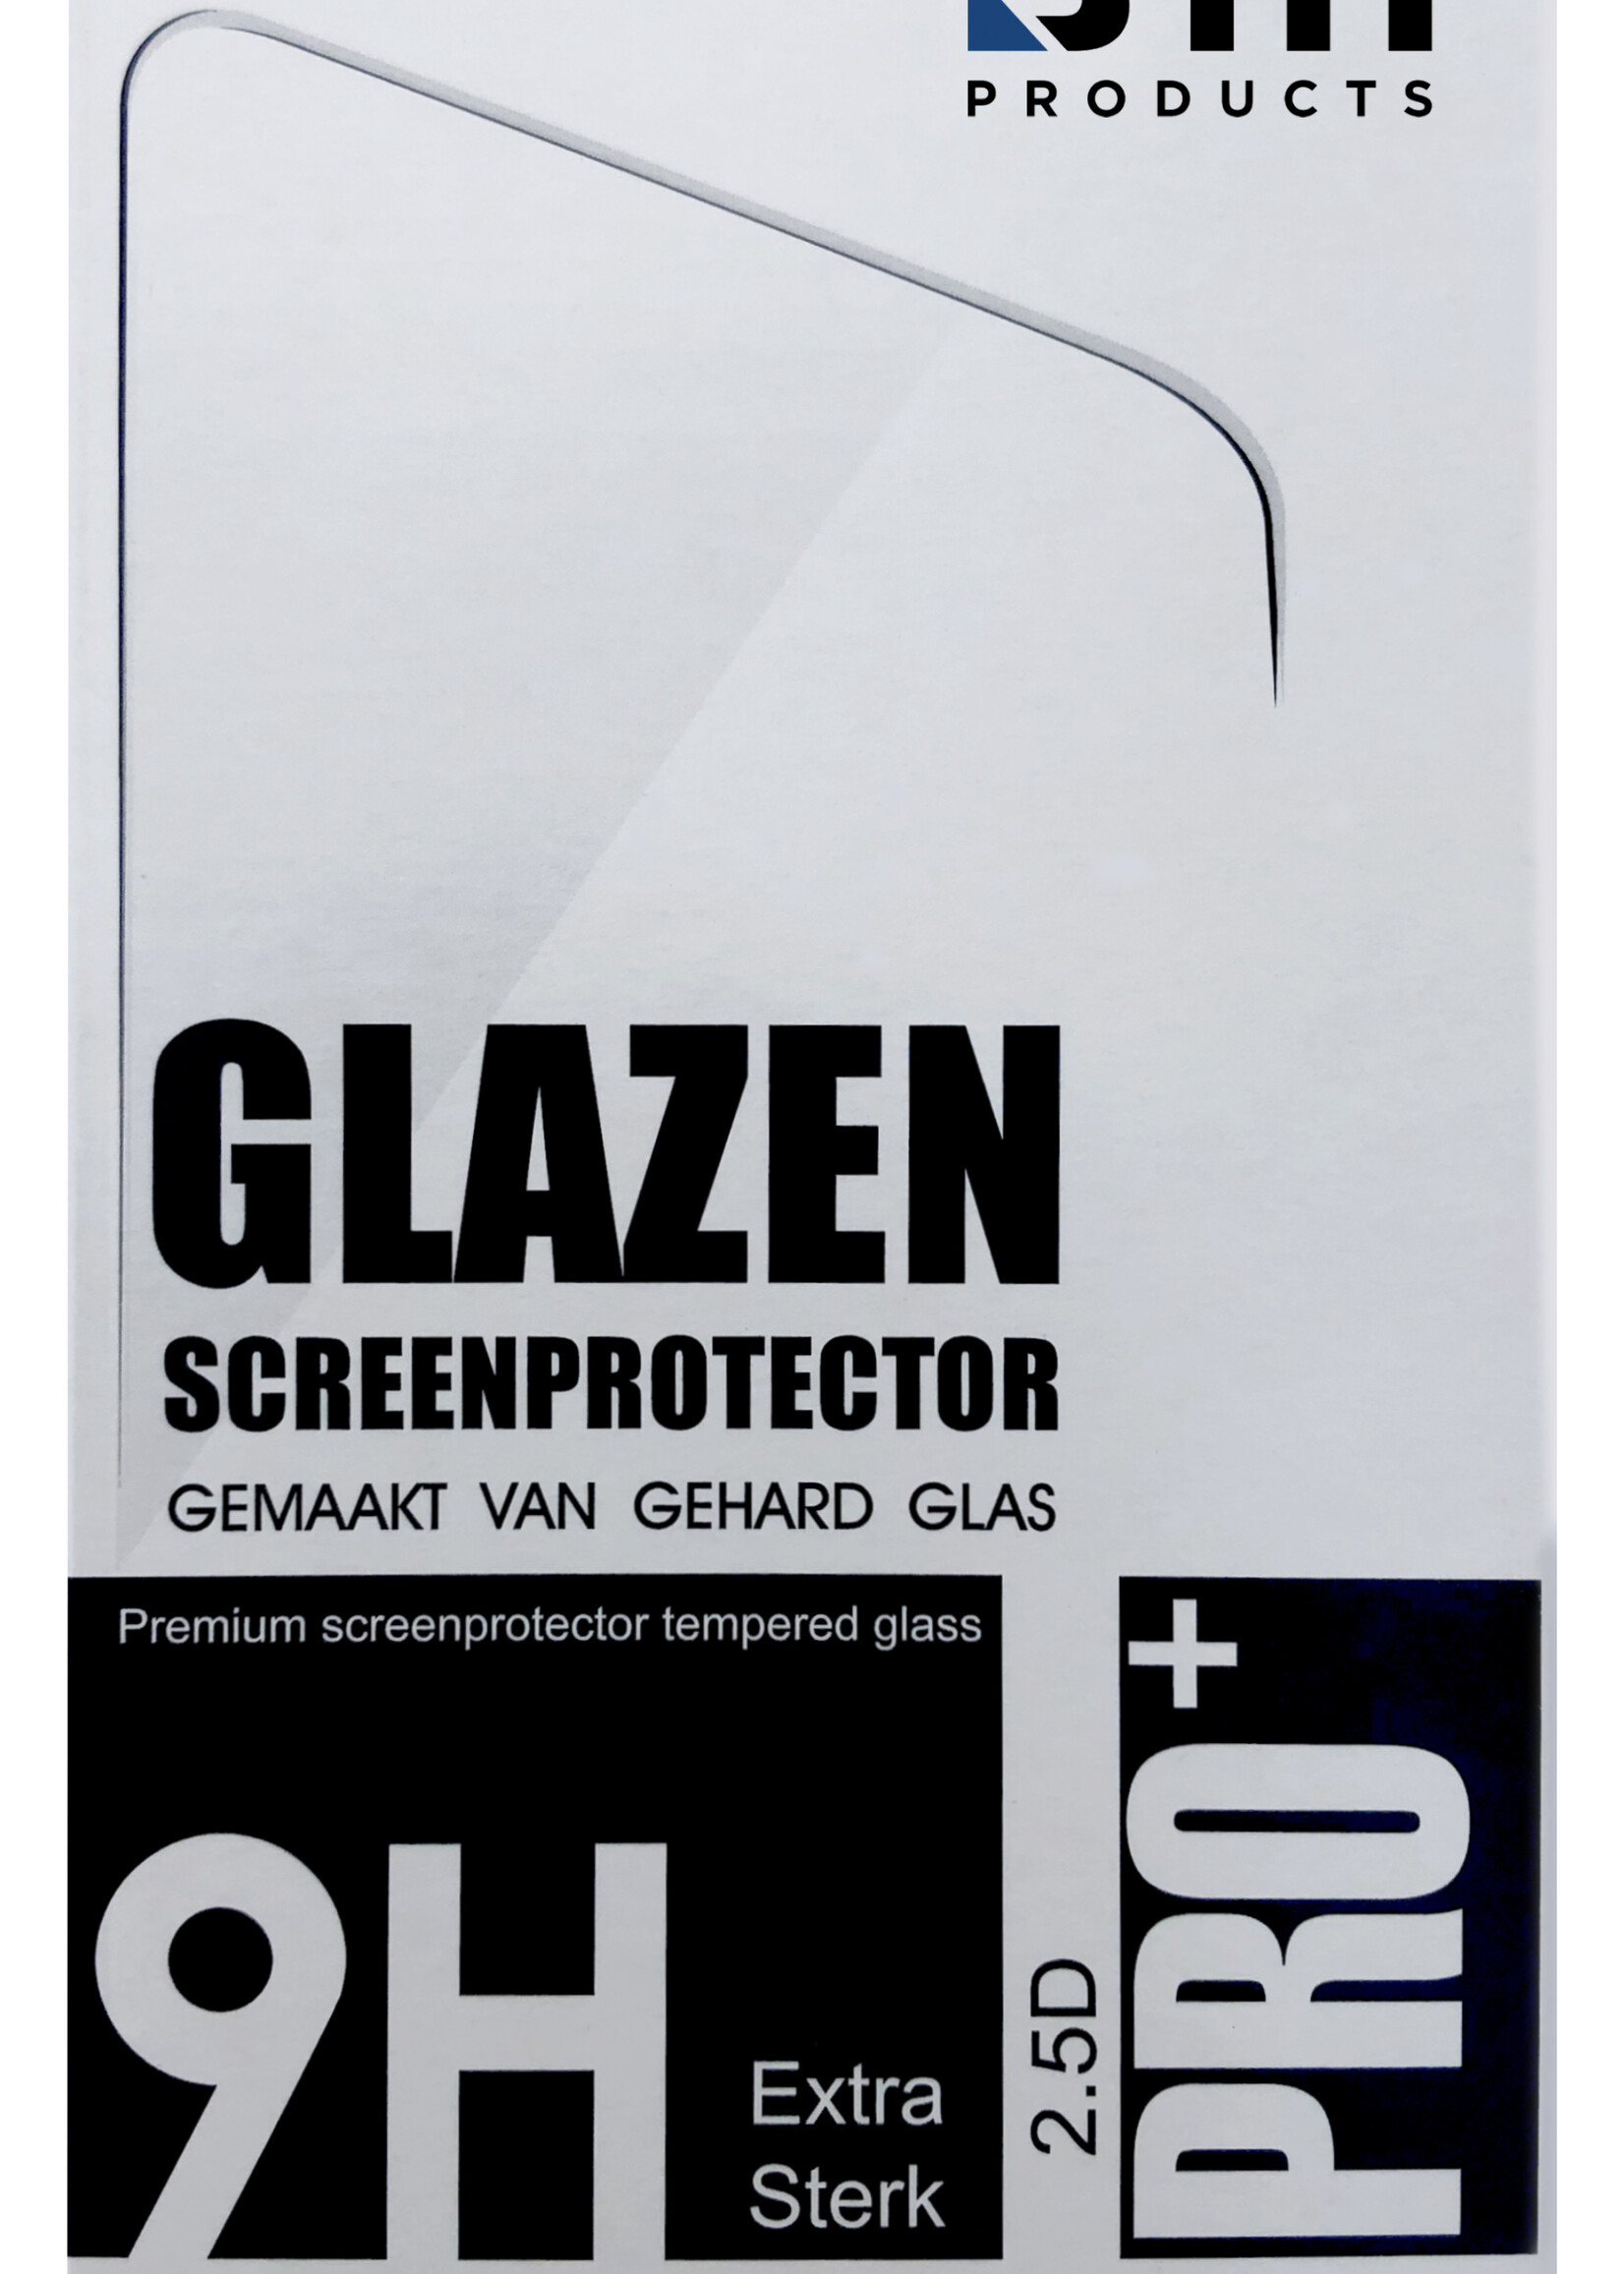 BTH Screenprotector Geschikt voor Samsung S21 Screenprotector Privacy Glas Gehard Full Cover - Screenprotector Geschikt voor Samsung Galaxy S21 Screenprotector Privacy Tempered Glass - 2 PACK